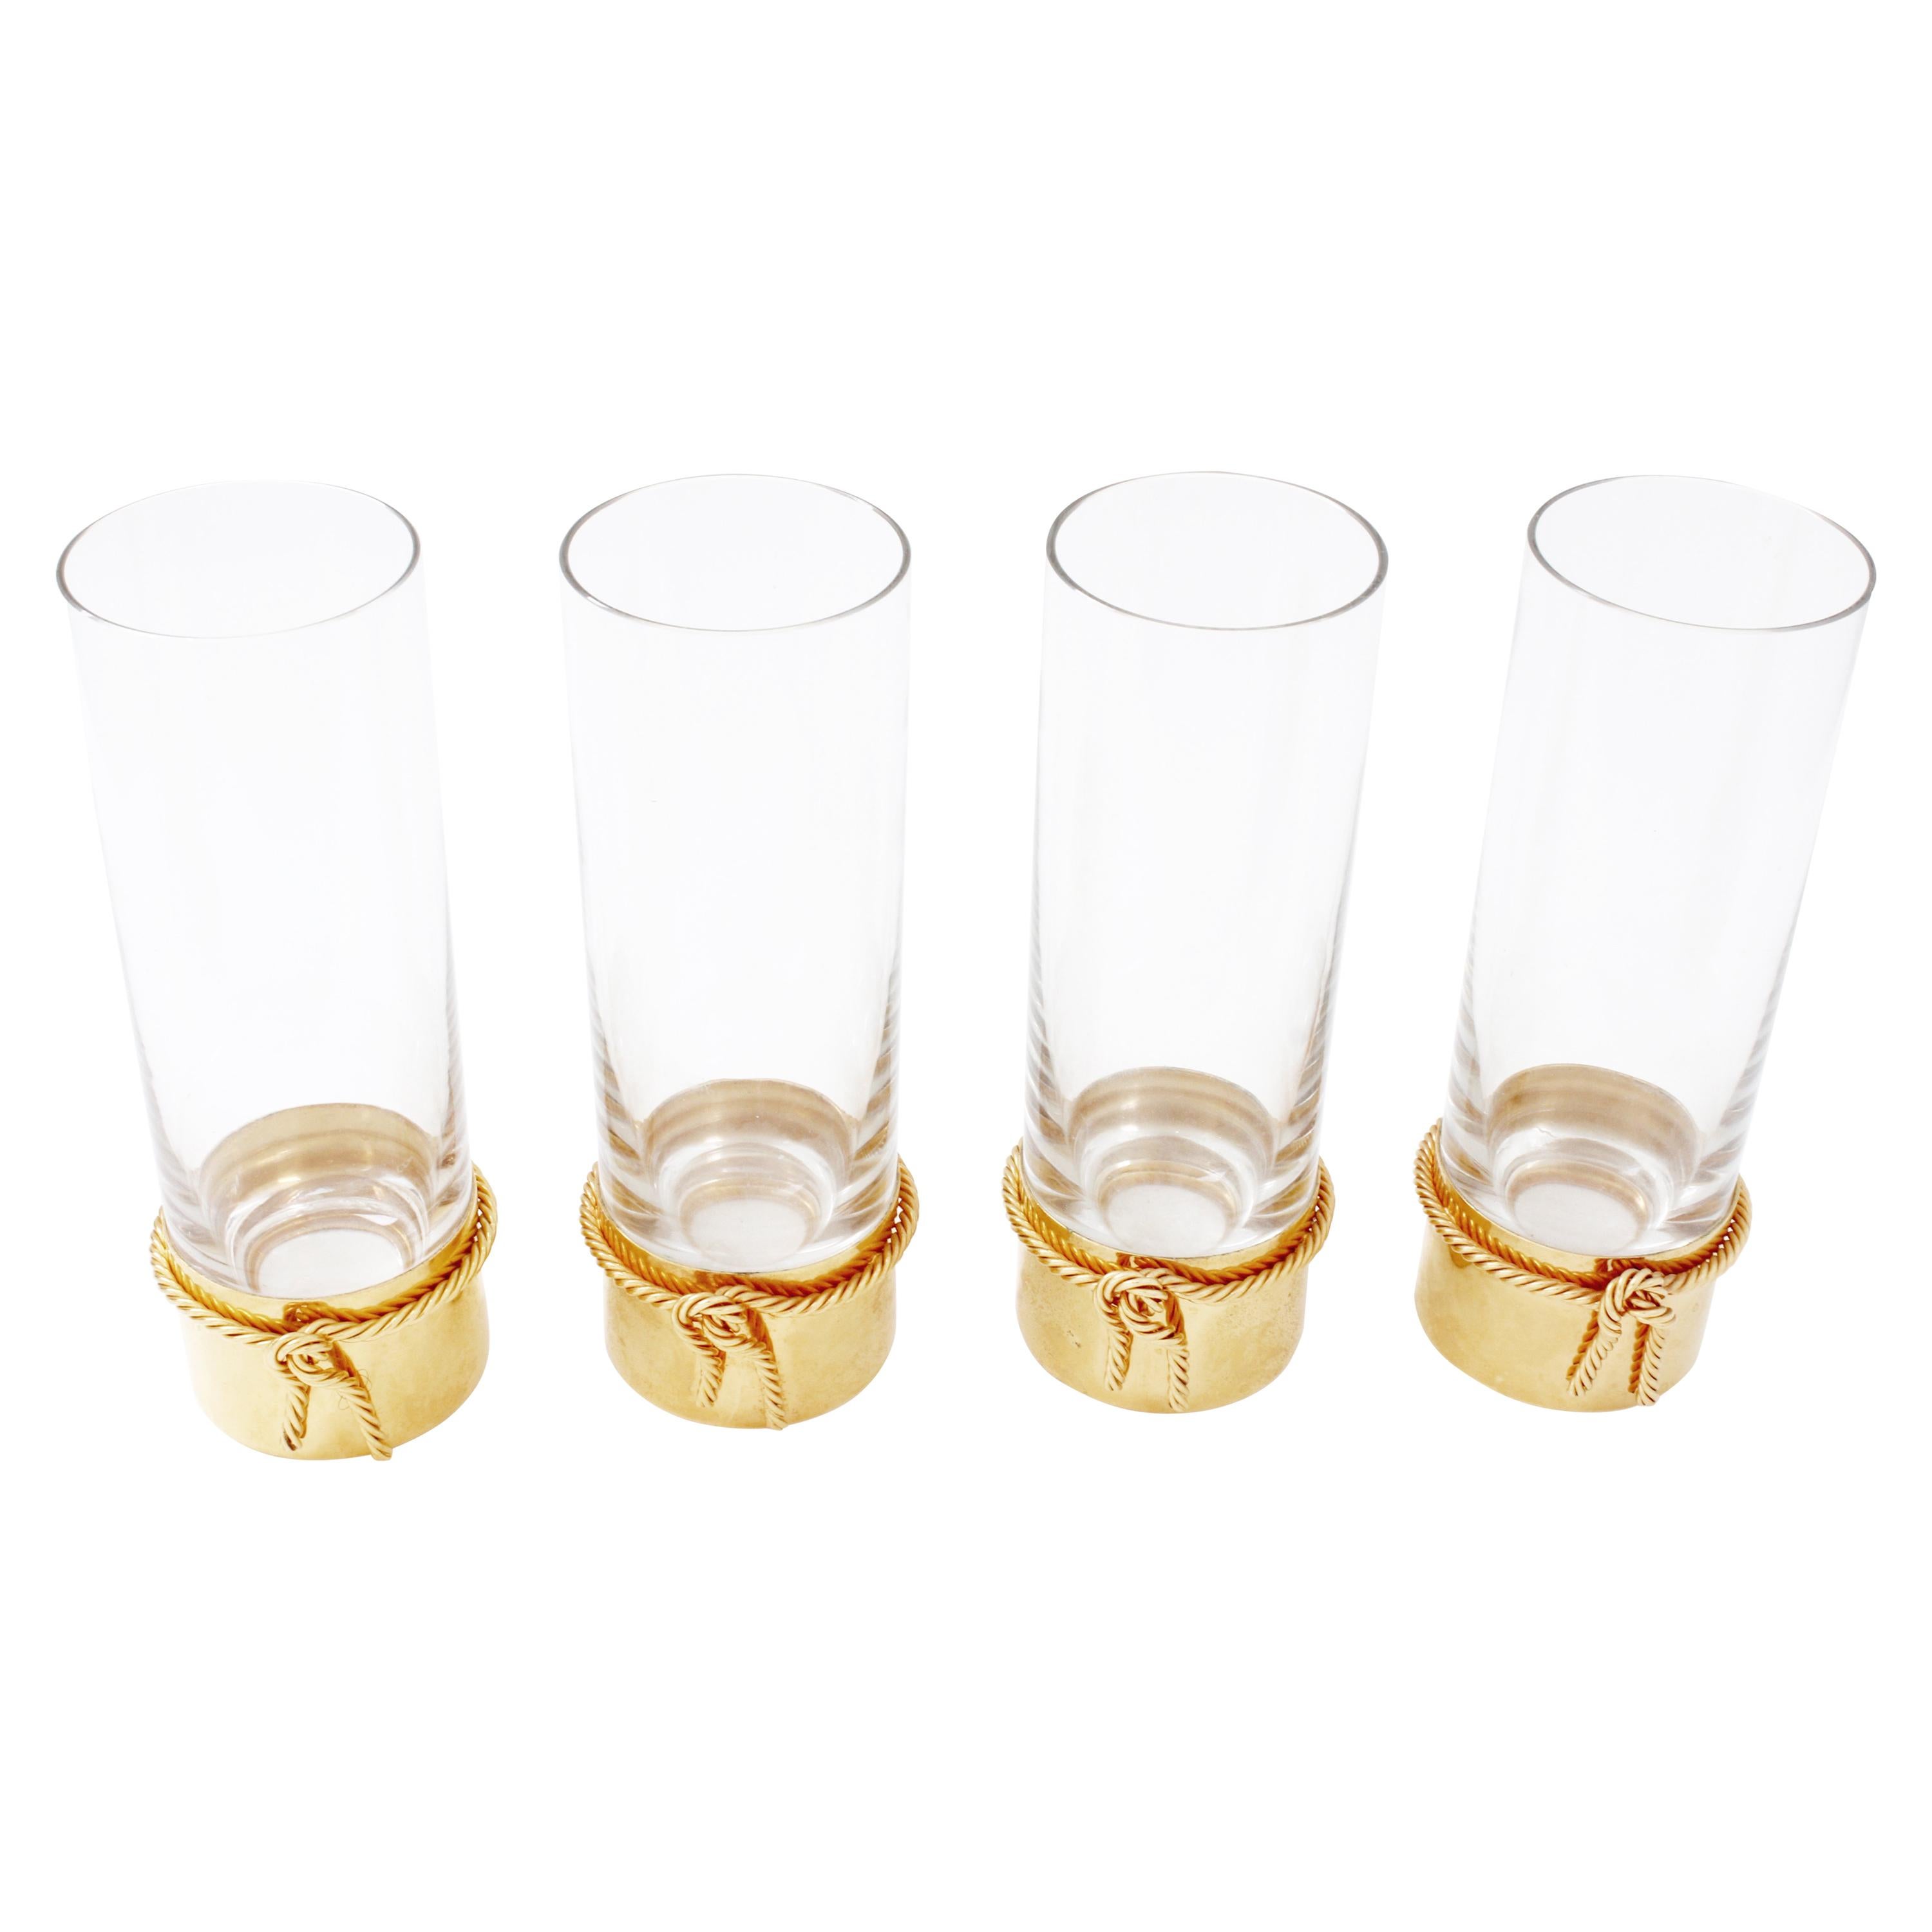 Rare Gucci Crystal & Gold Metal Highball Glasses 4pc Barware Set Cocktails 80s